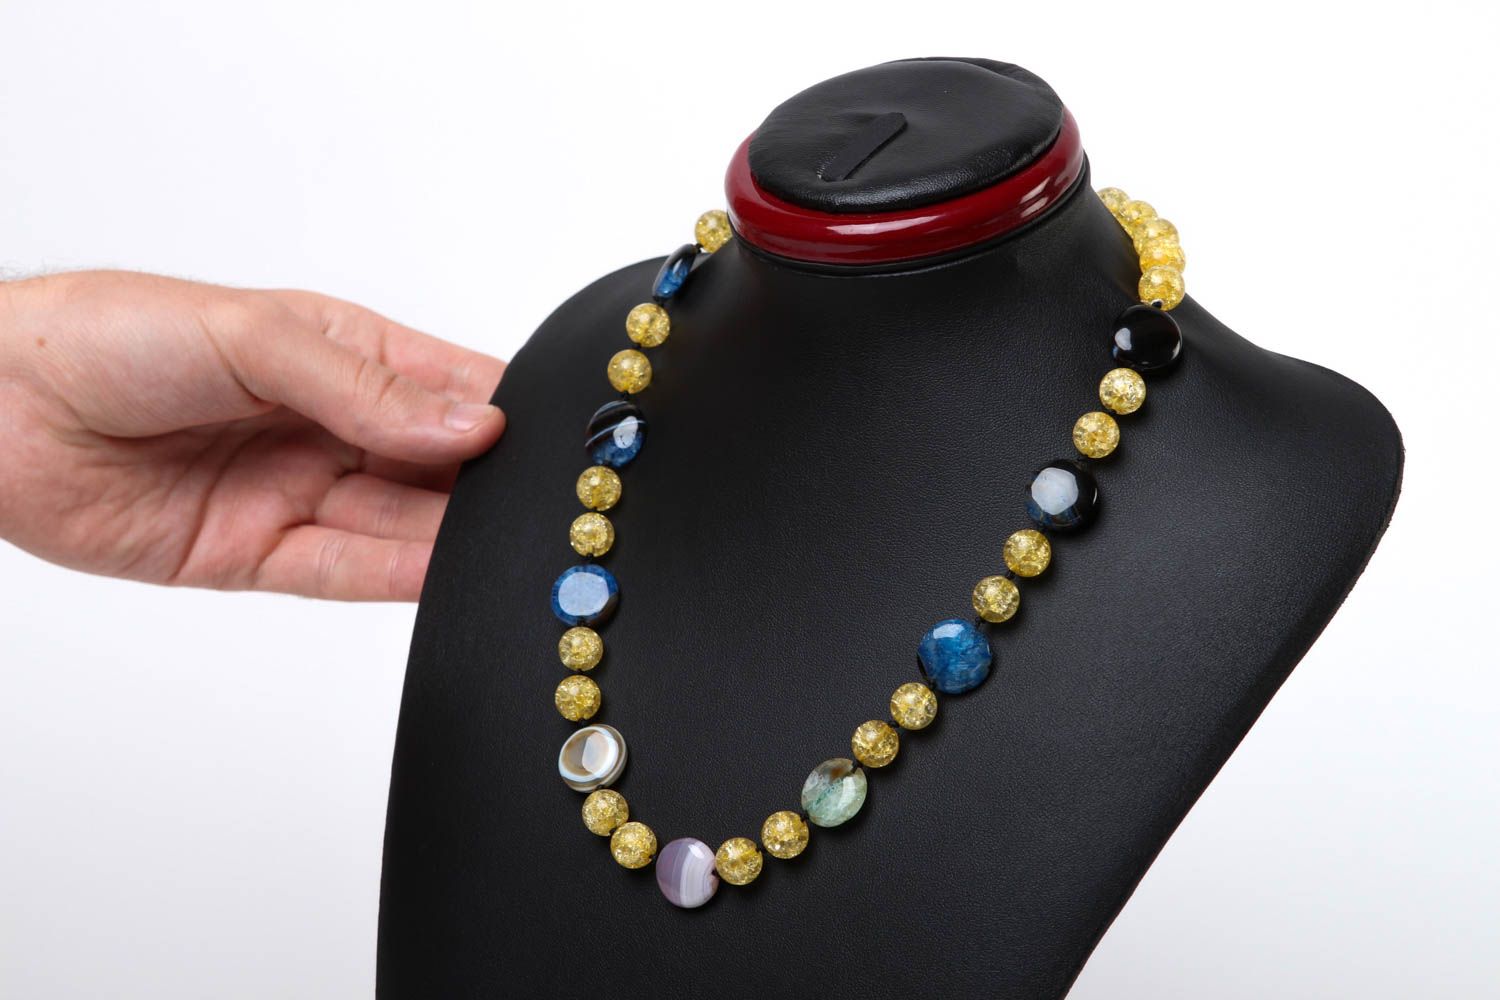 Homemade jewelry designer necklace fashion necklaces for women bead necklace photo 5